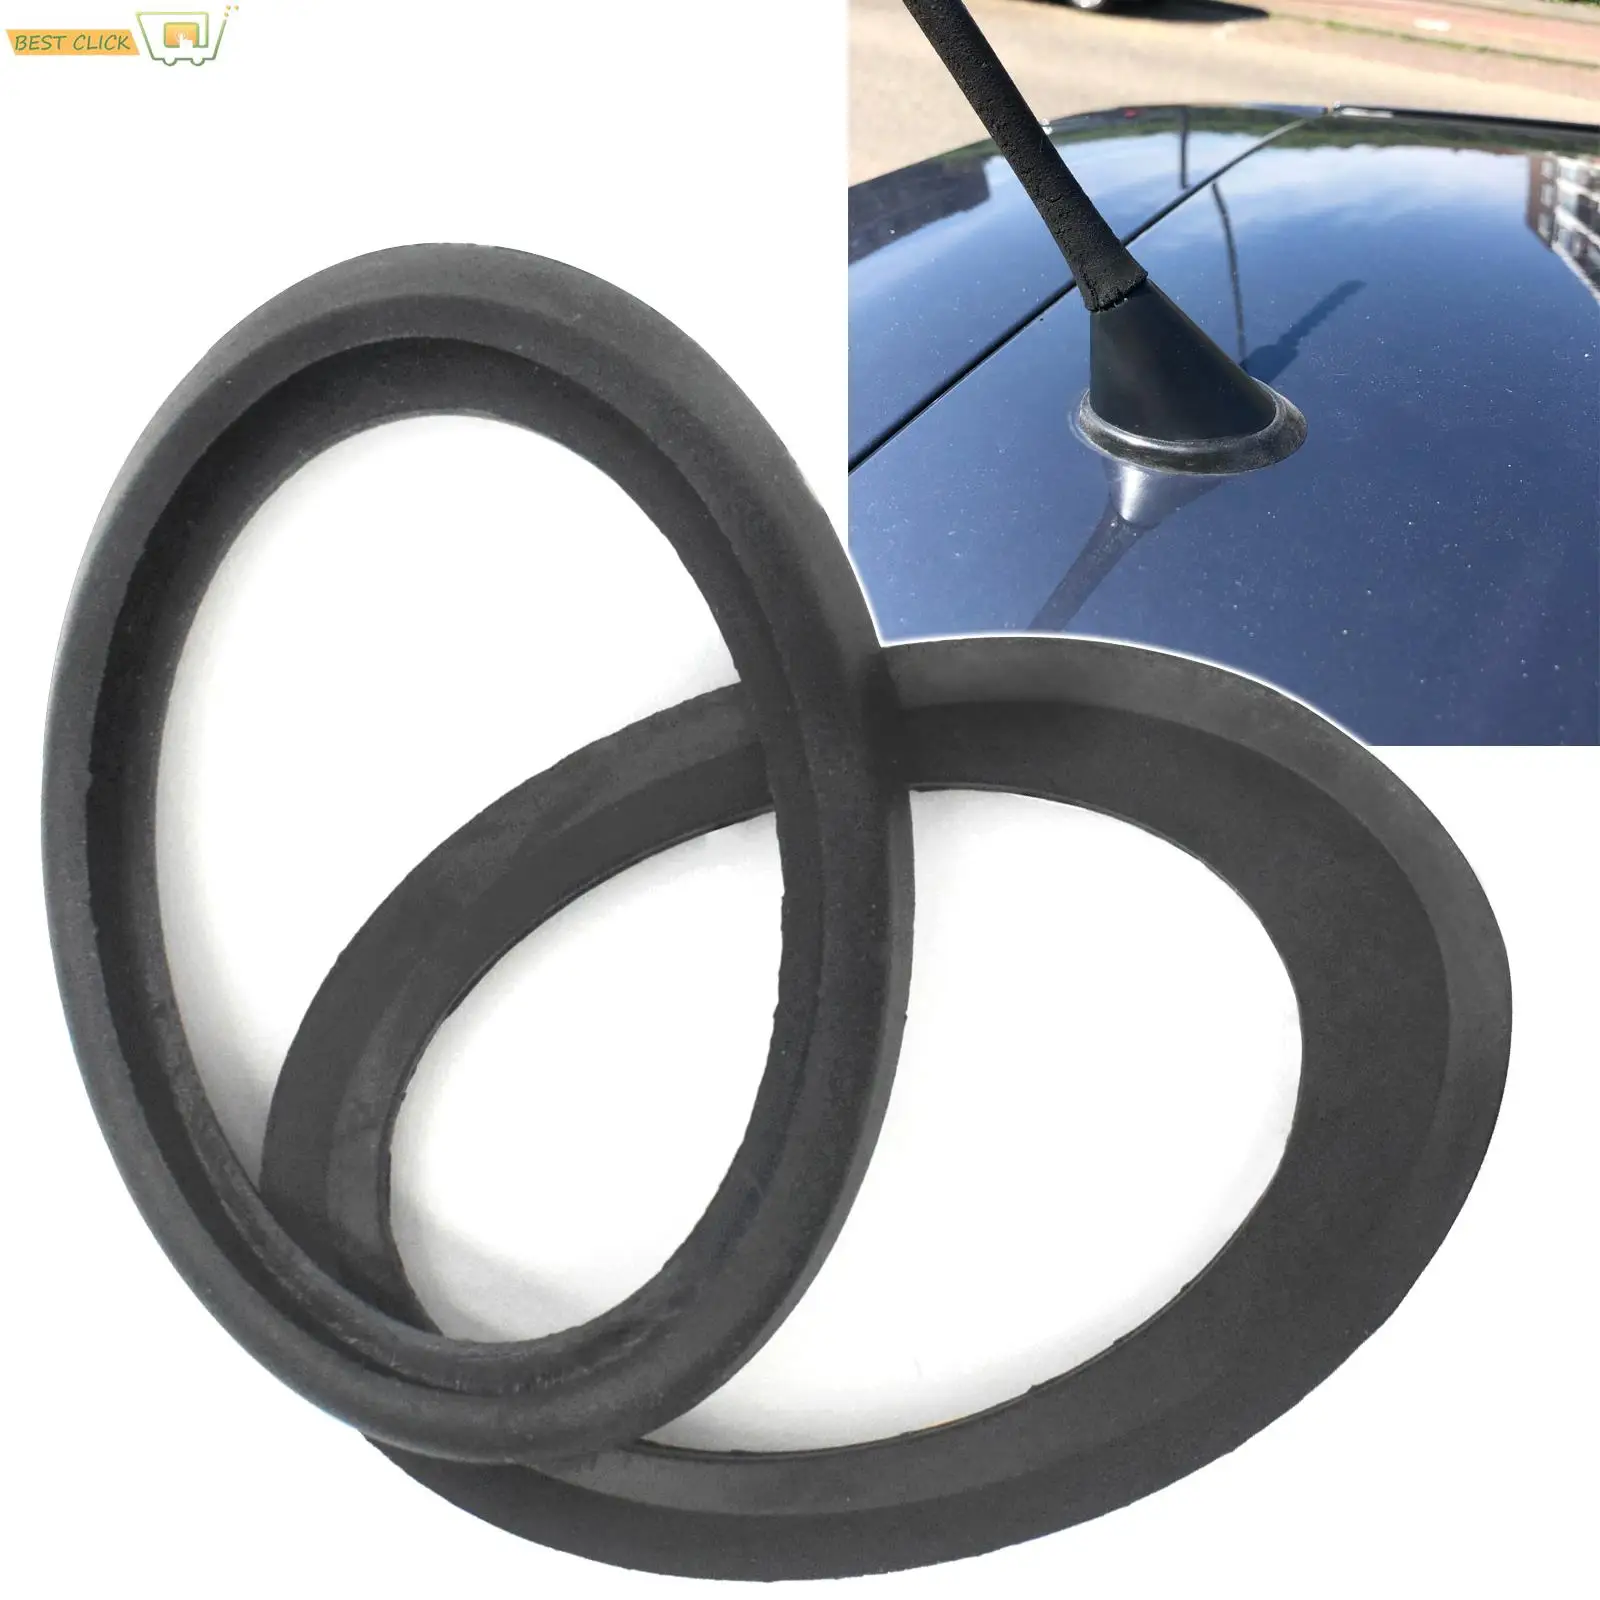 

1X Black Rubber Automobile Roof Aerial Antenna Gasket Seal For Audi Vauxhall Opel Sokda Toyota Ford Peugeot Chrysler Mitsubishi